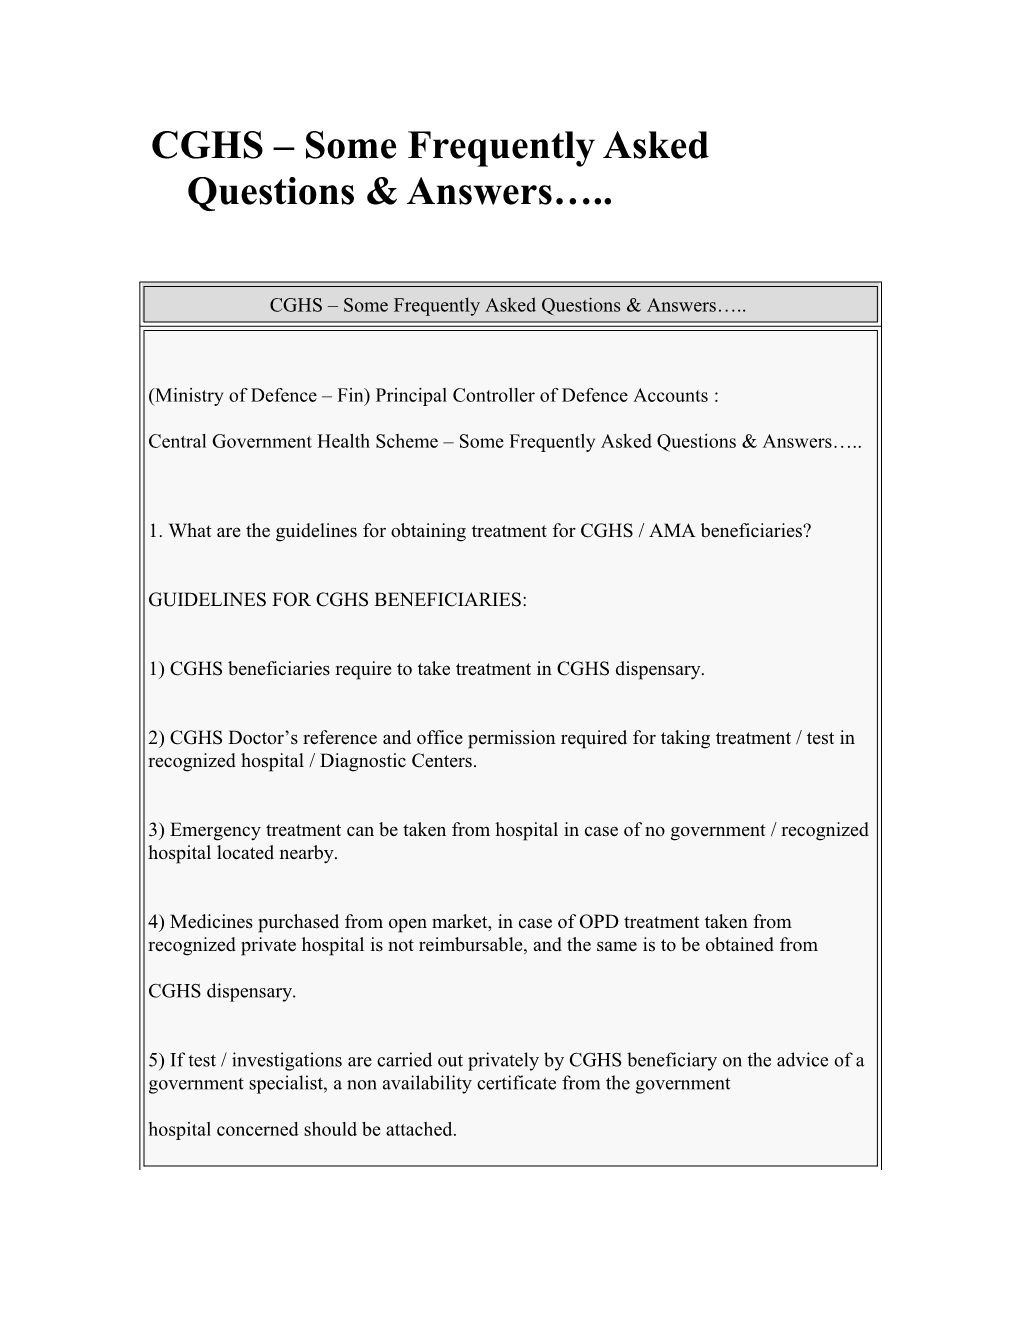 CGHS Some Frequently Asked Questions & Answers